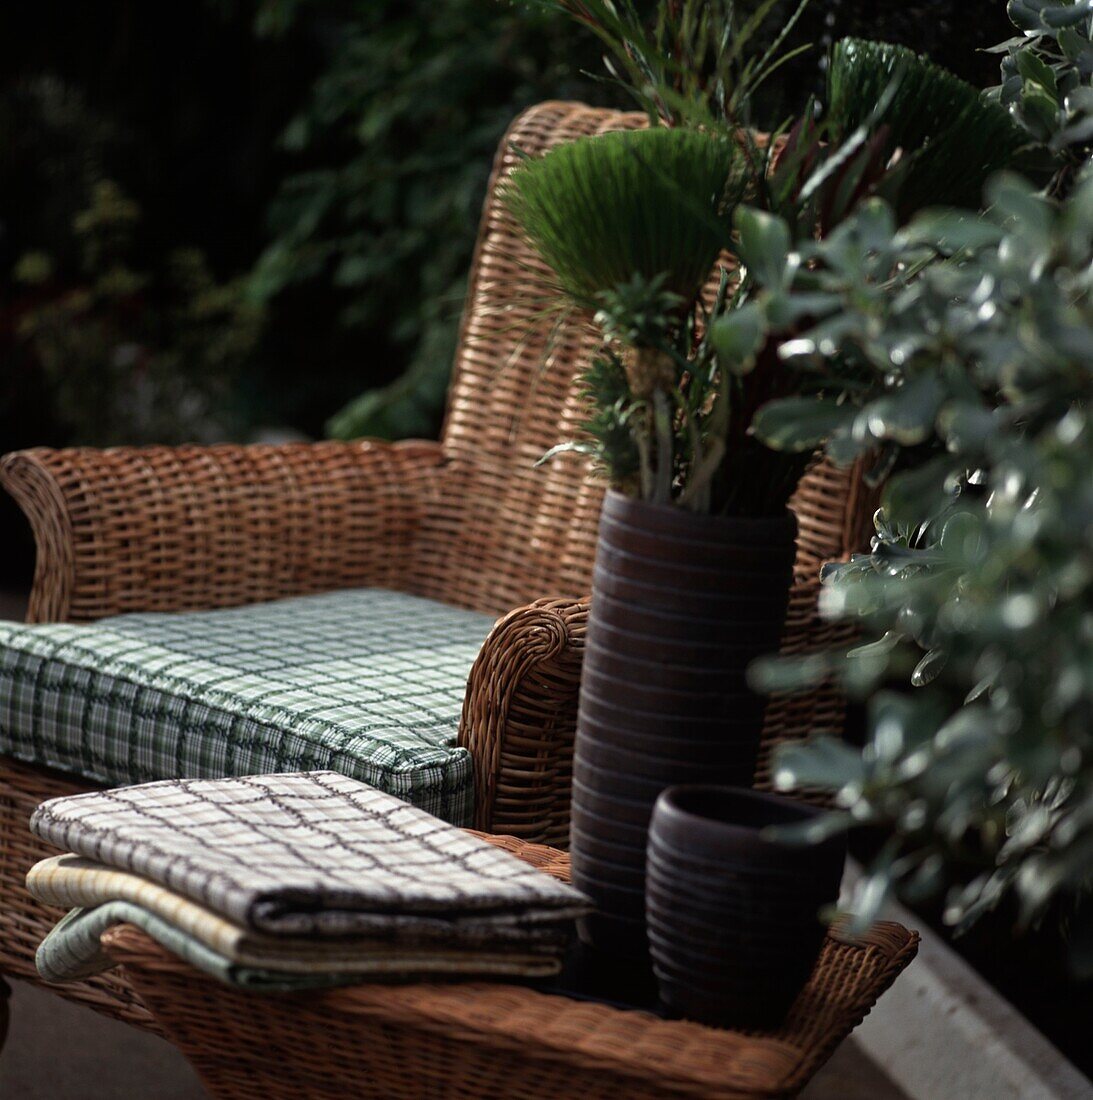 Wicker chairs with plants and doilies